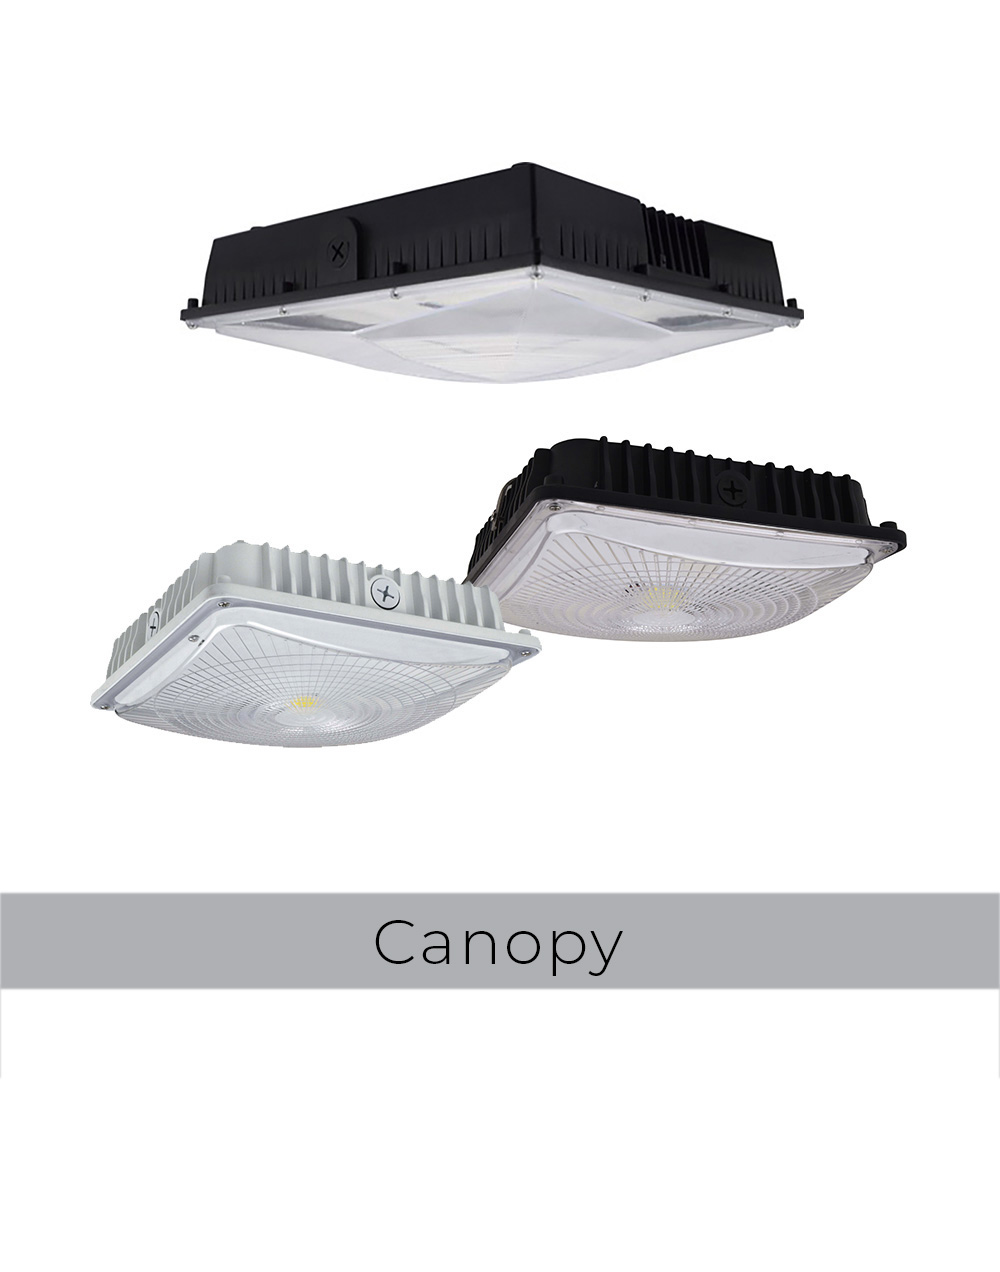 naturaled canopy fixtures